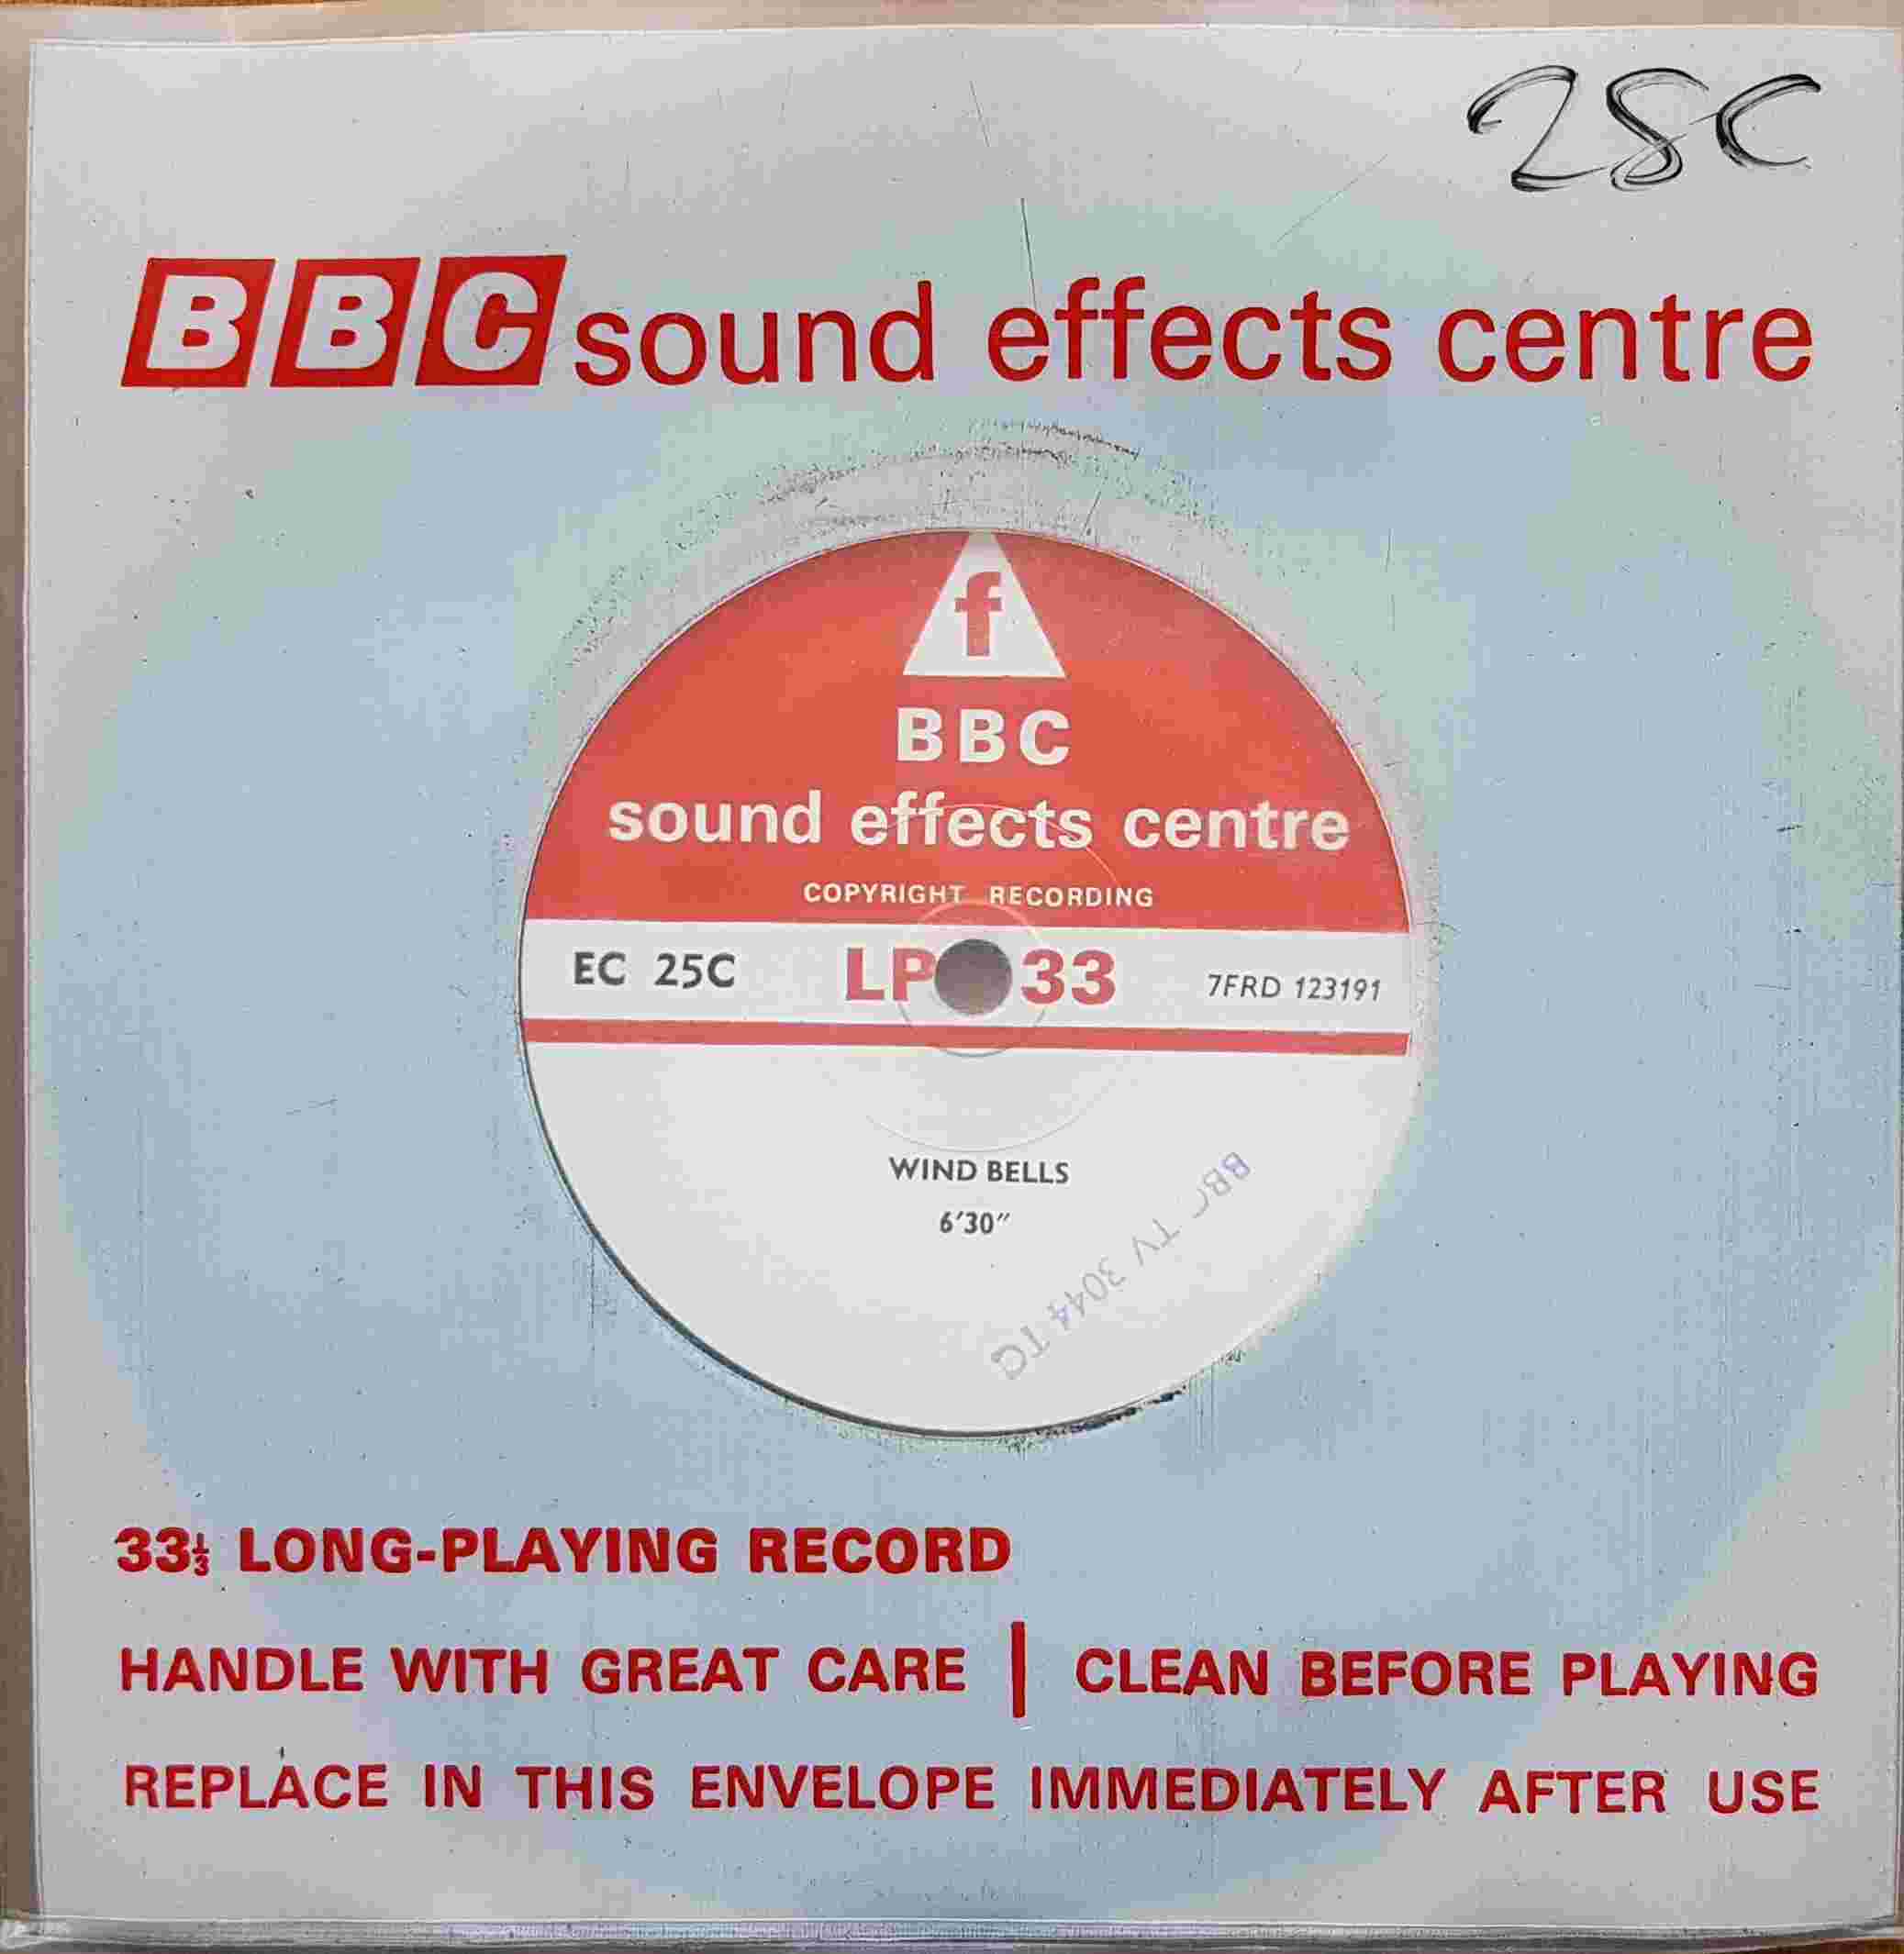 Picture of EC 25C Bells by artist Not registered from the BBC singles - Records and Tapes library